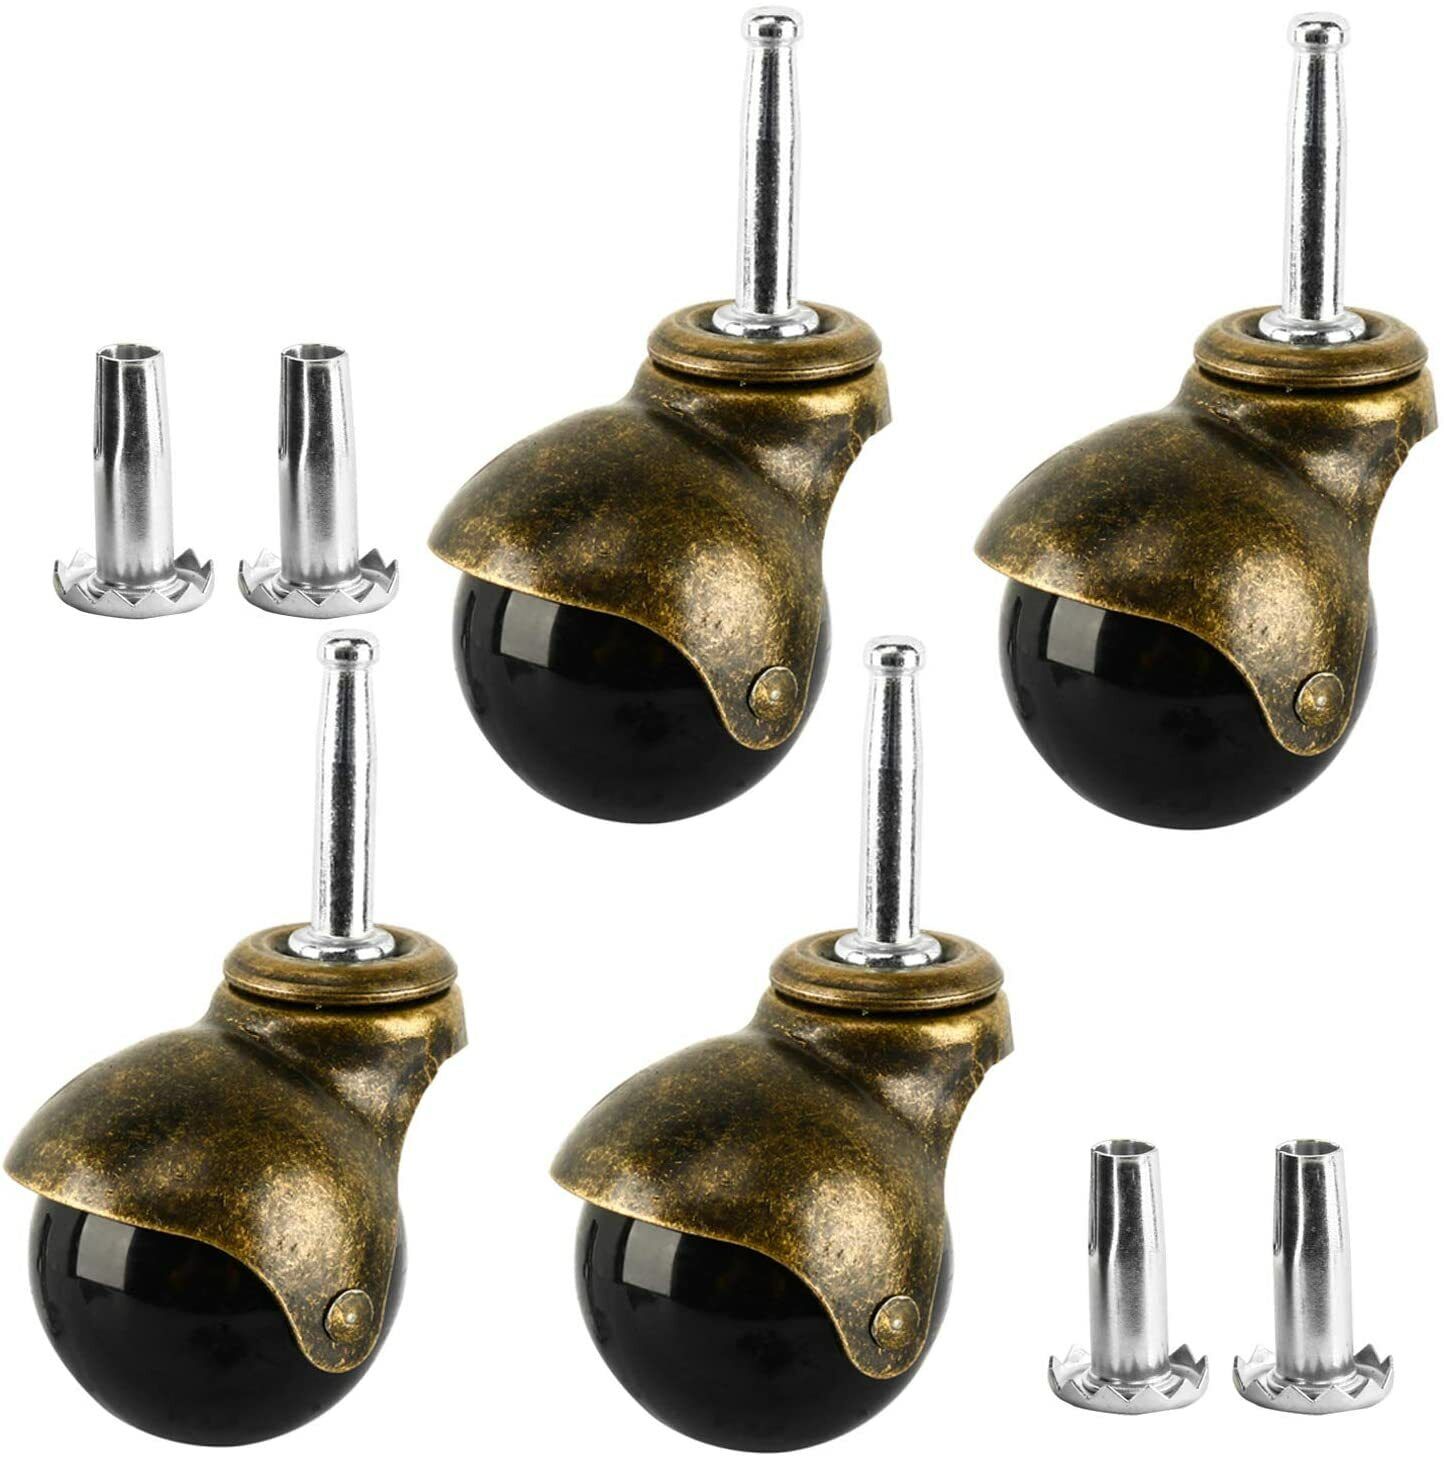 4Pcs Caster 2\'\' Antique Copper Ball Caster w/ Socket Type Mounting Stem 8 x 38mm